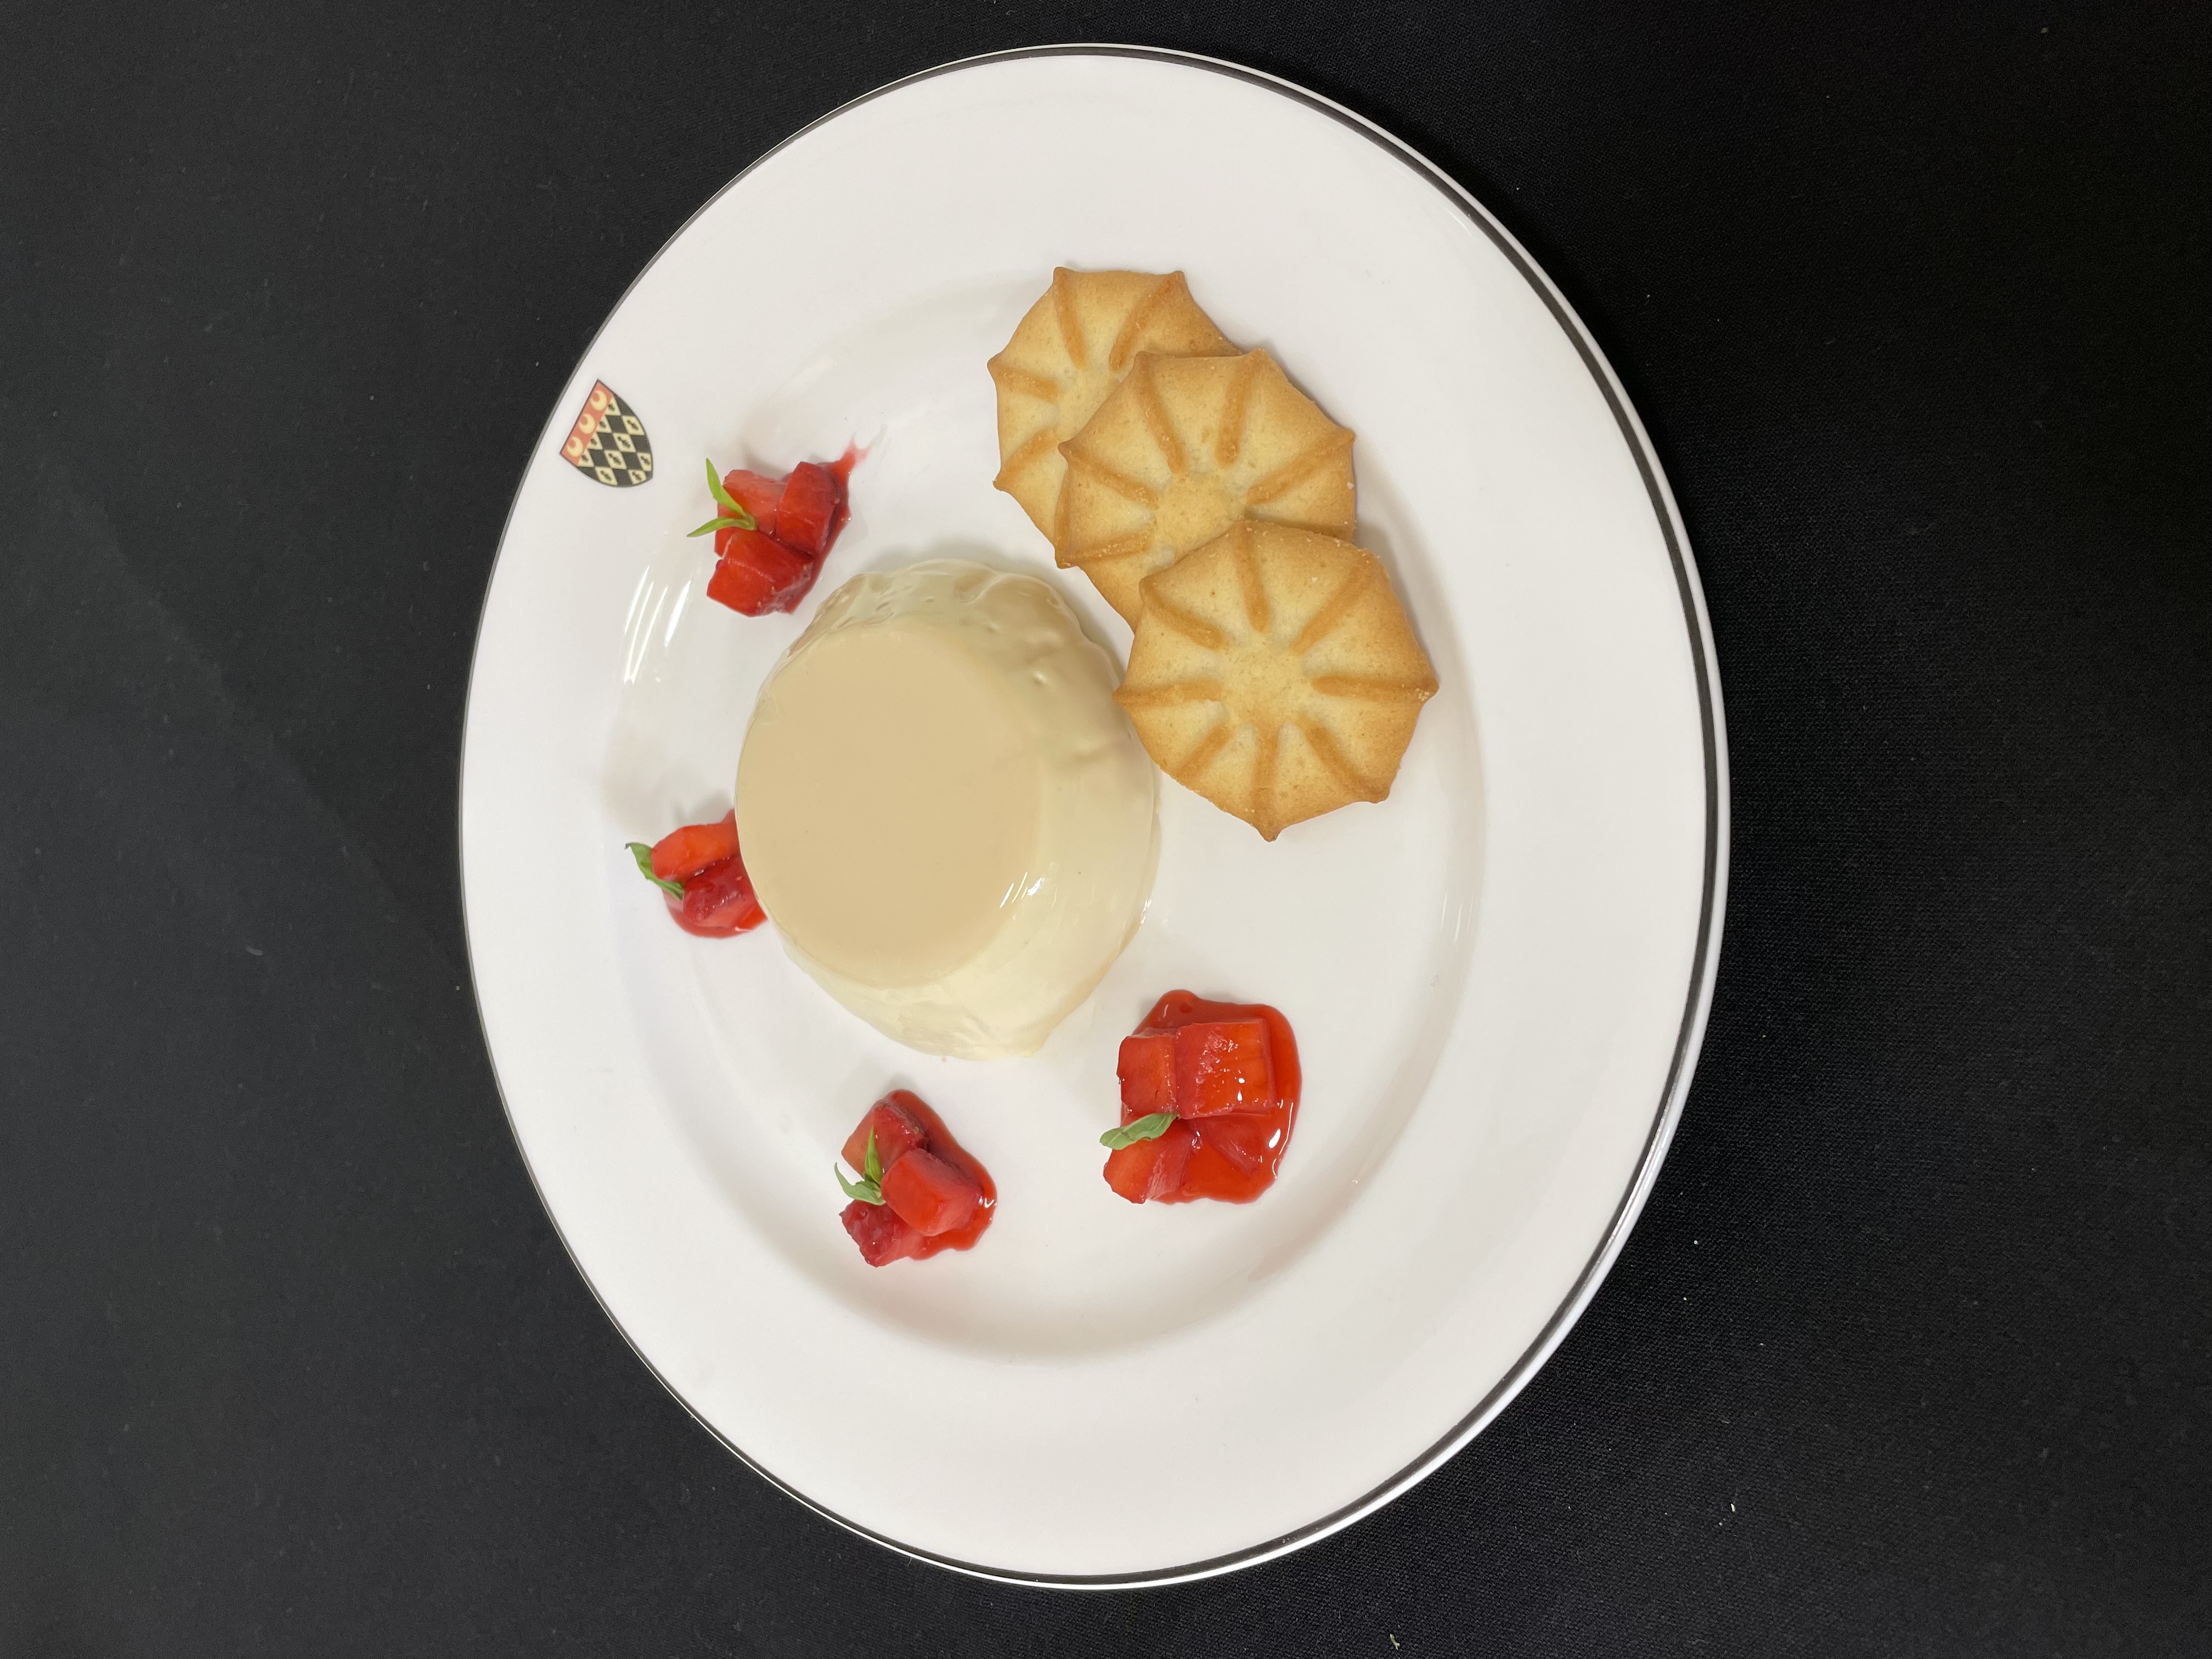 Vanilla panna cotta: served with poached strawberries, shortbread and baby basil